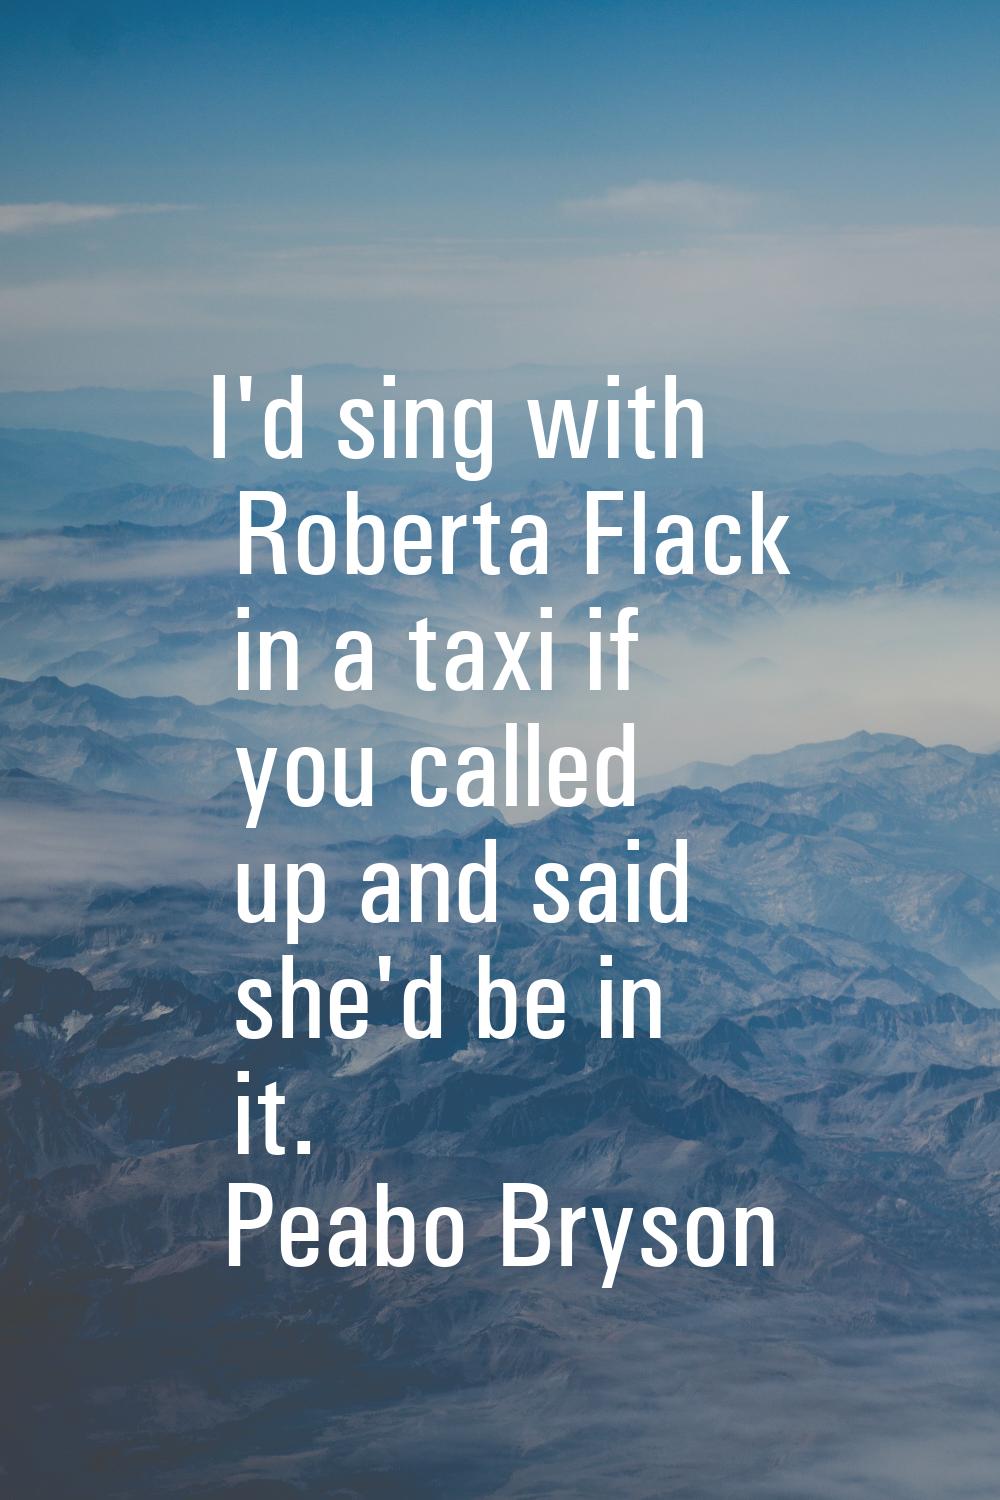 I'd sing with Roberta Flack in a taxi if you called up and said she'd be in it.